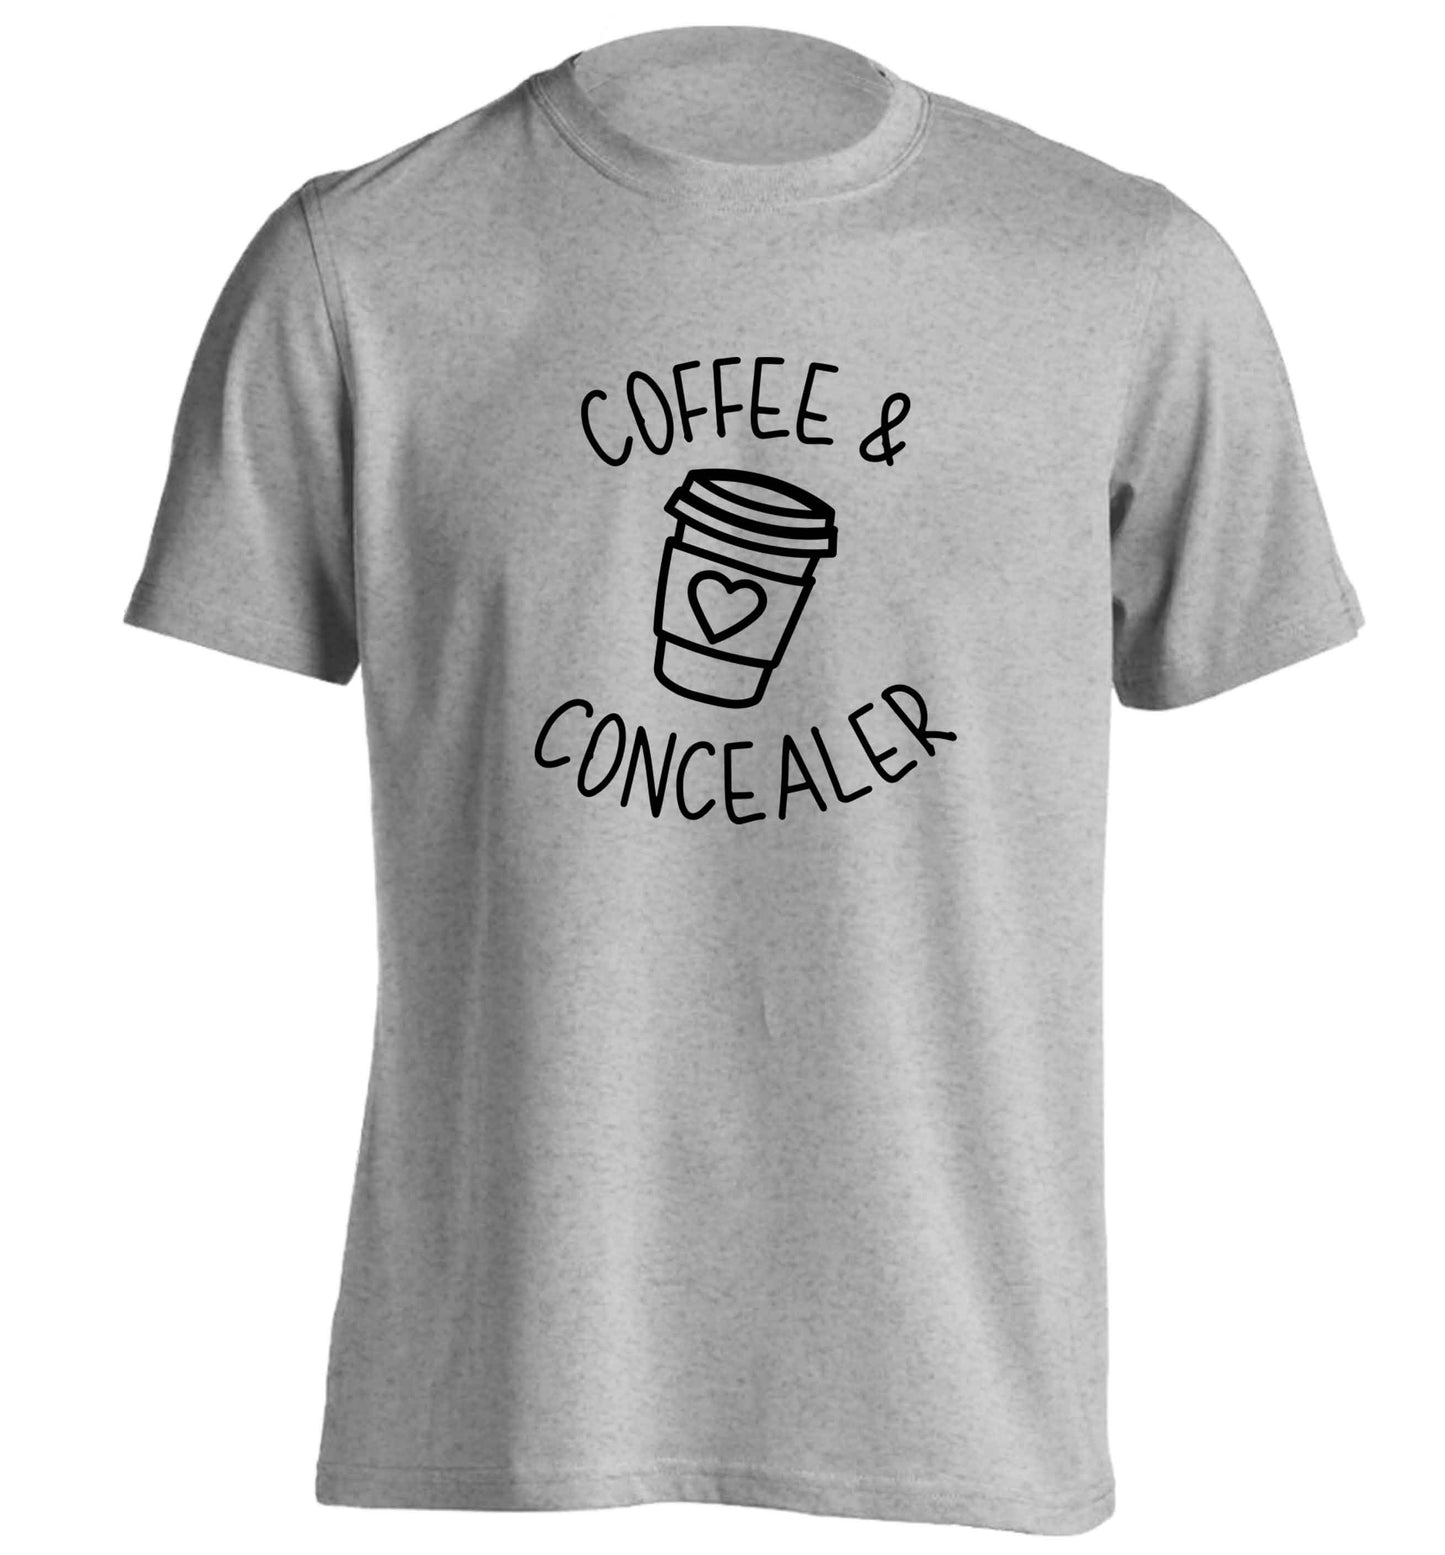 Coffee and concealer adults unisex grey Tshirt 2XL